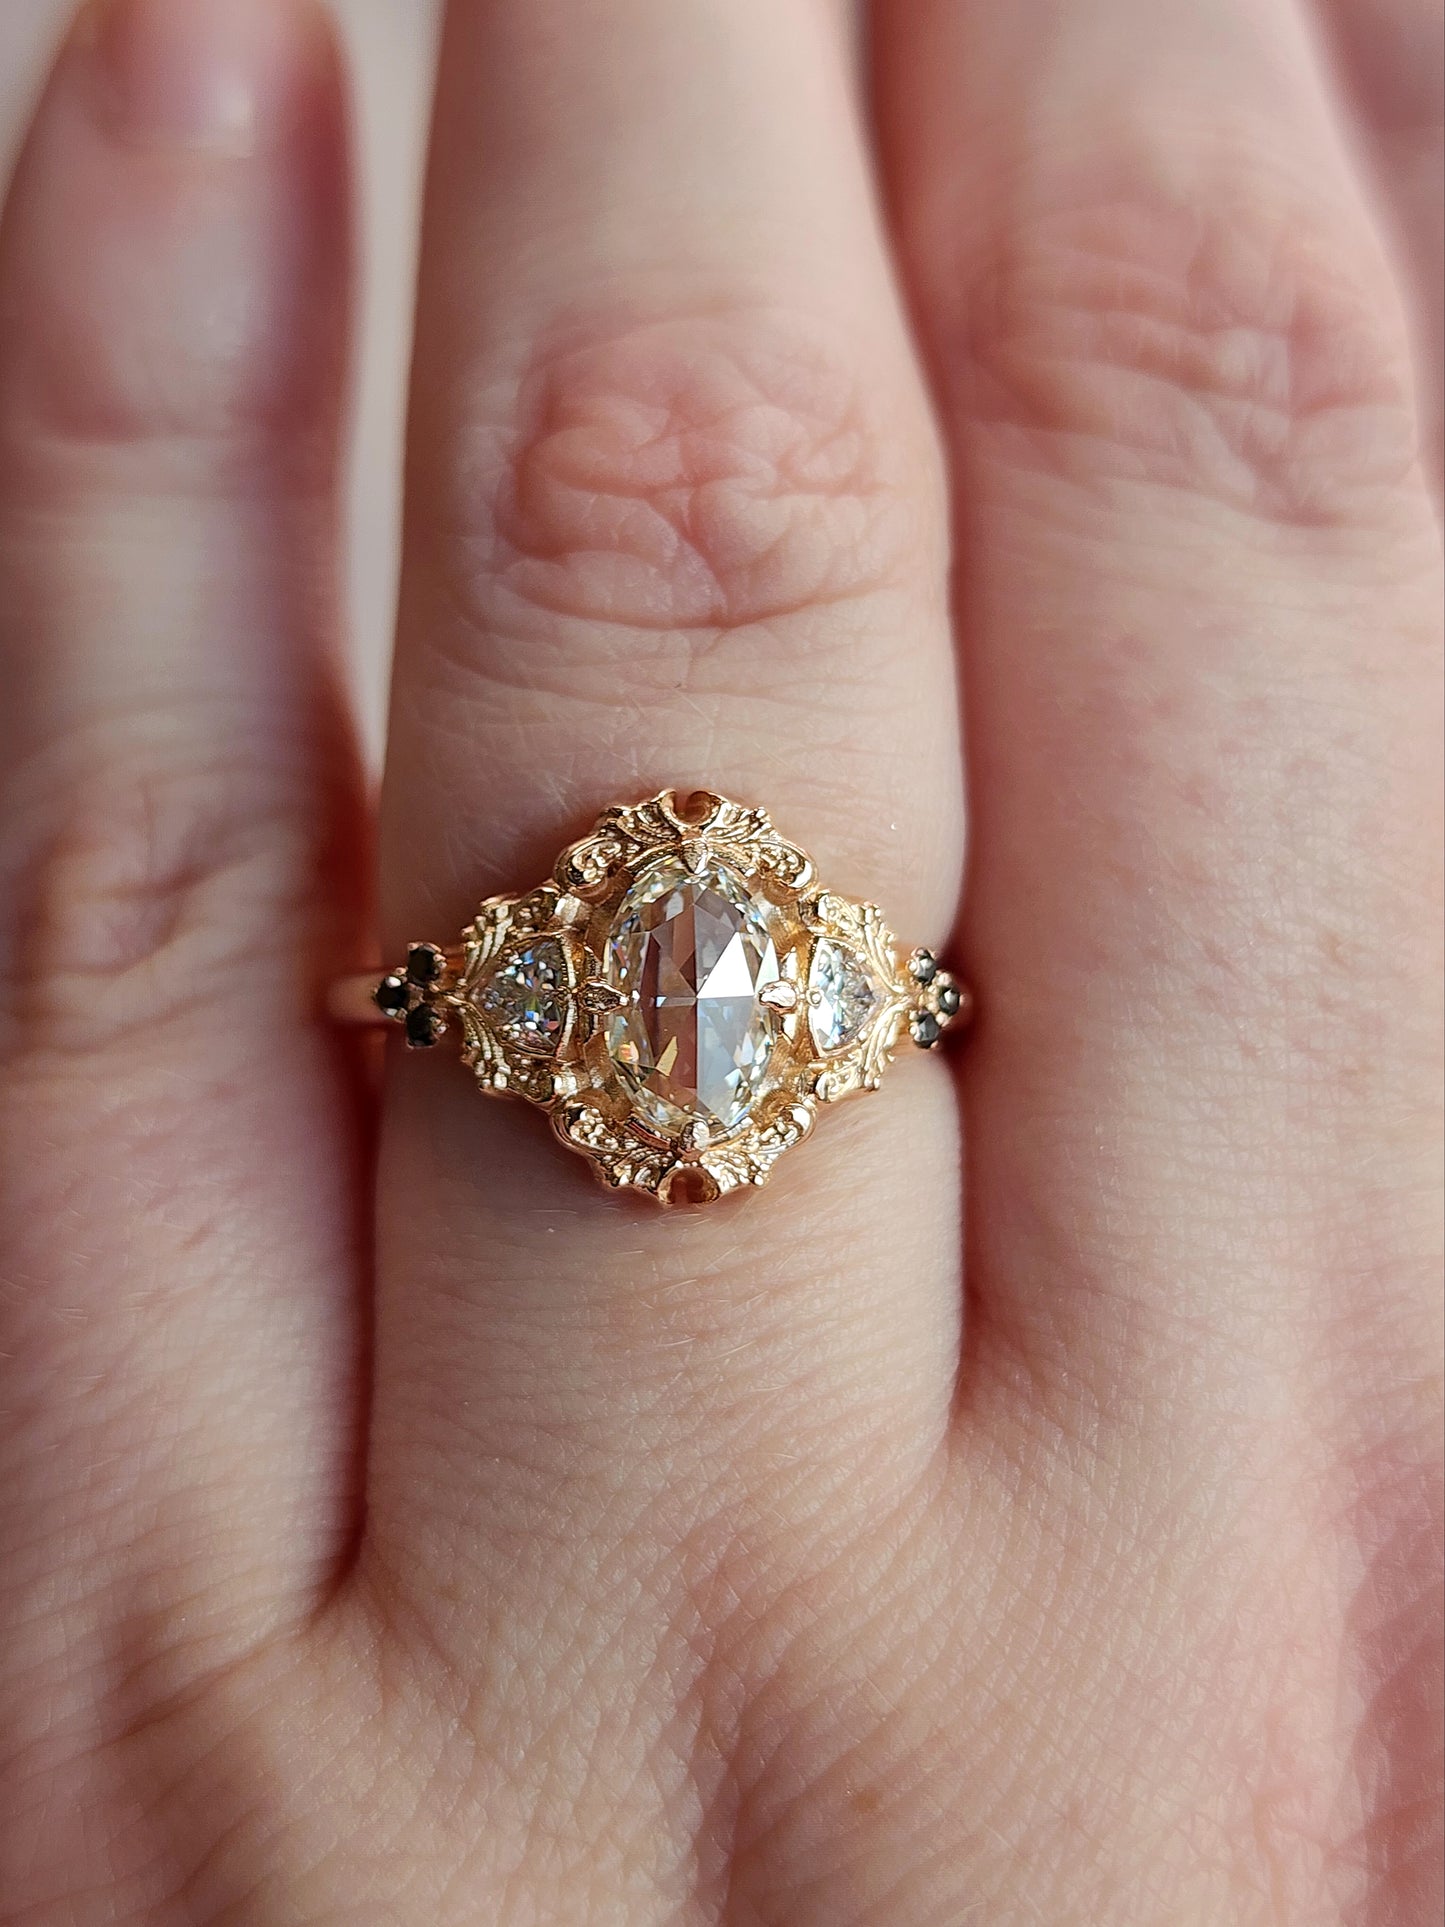 17 Unique Filigree Engagement Ring Styles « Green Lake Jewelry Works | Engagement  ring styles, Fashion rings, Filigree engagement ring